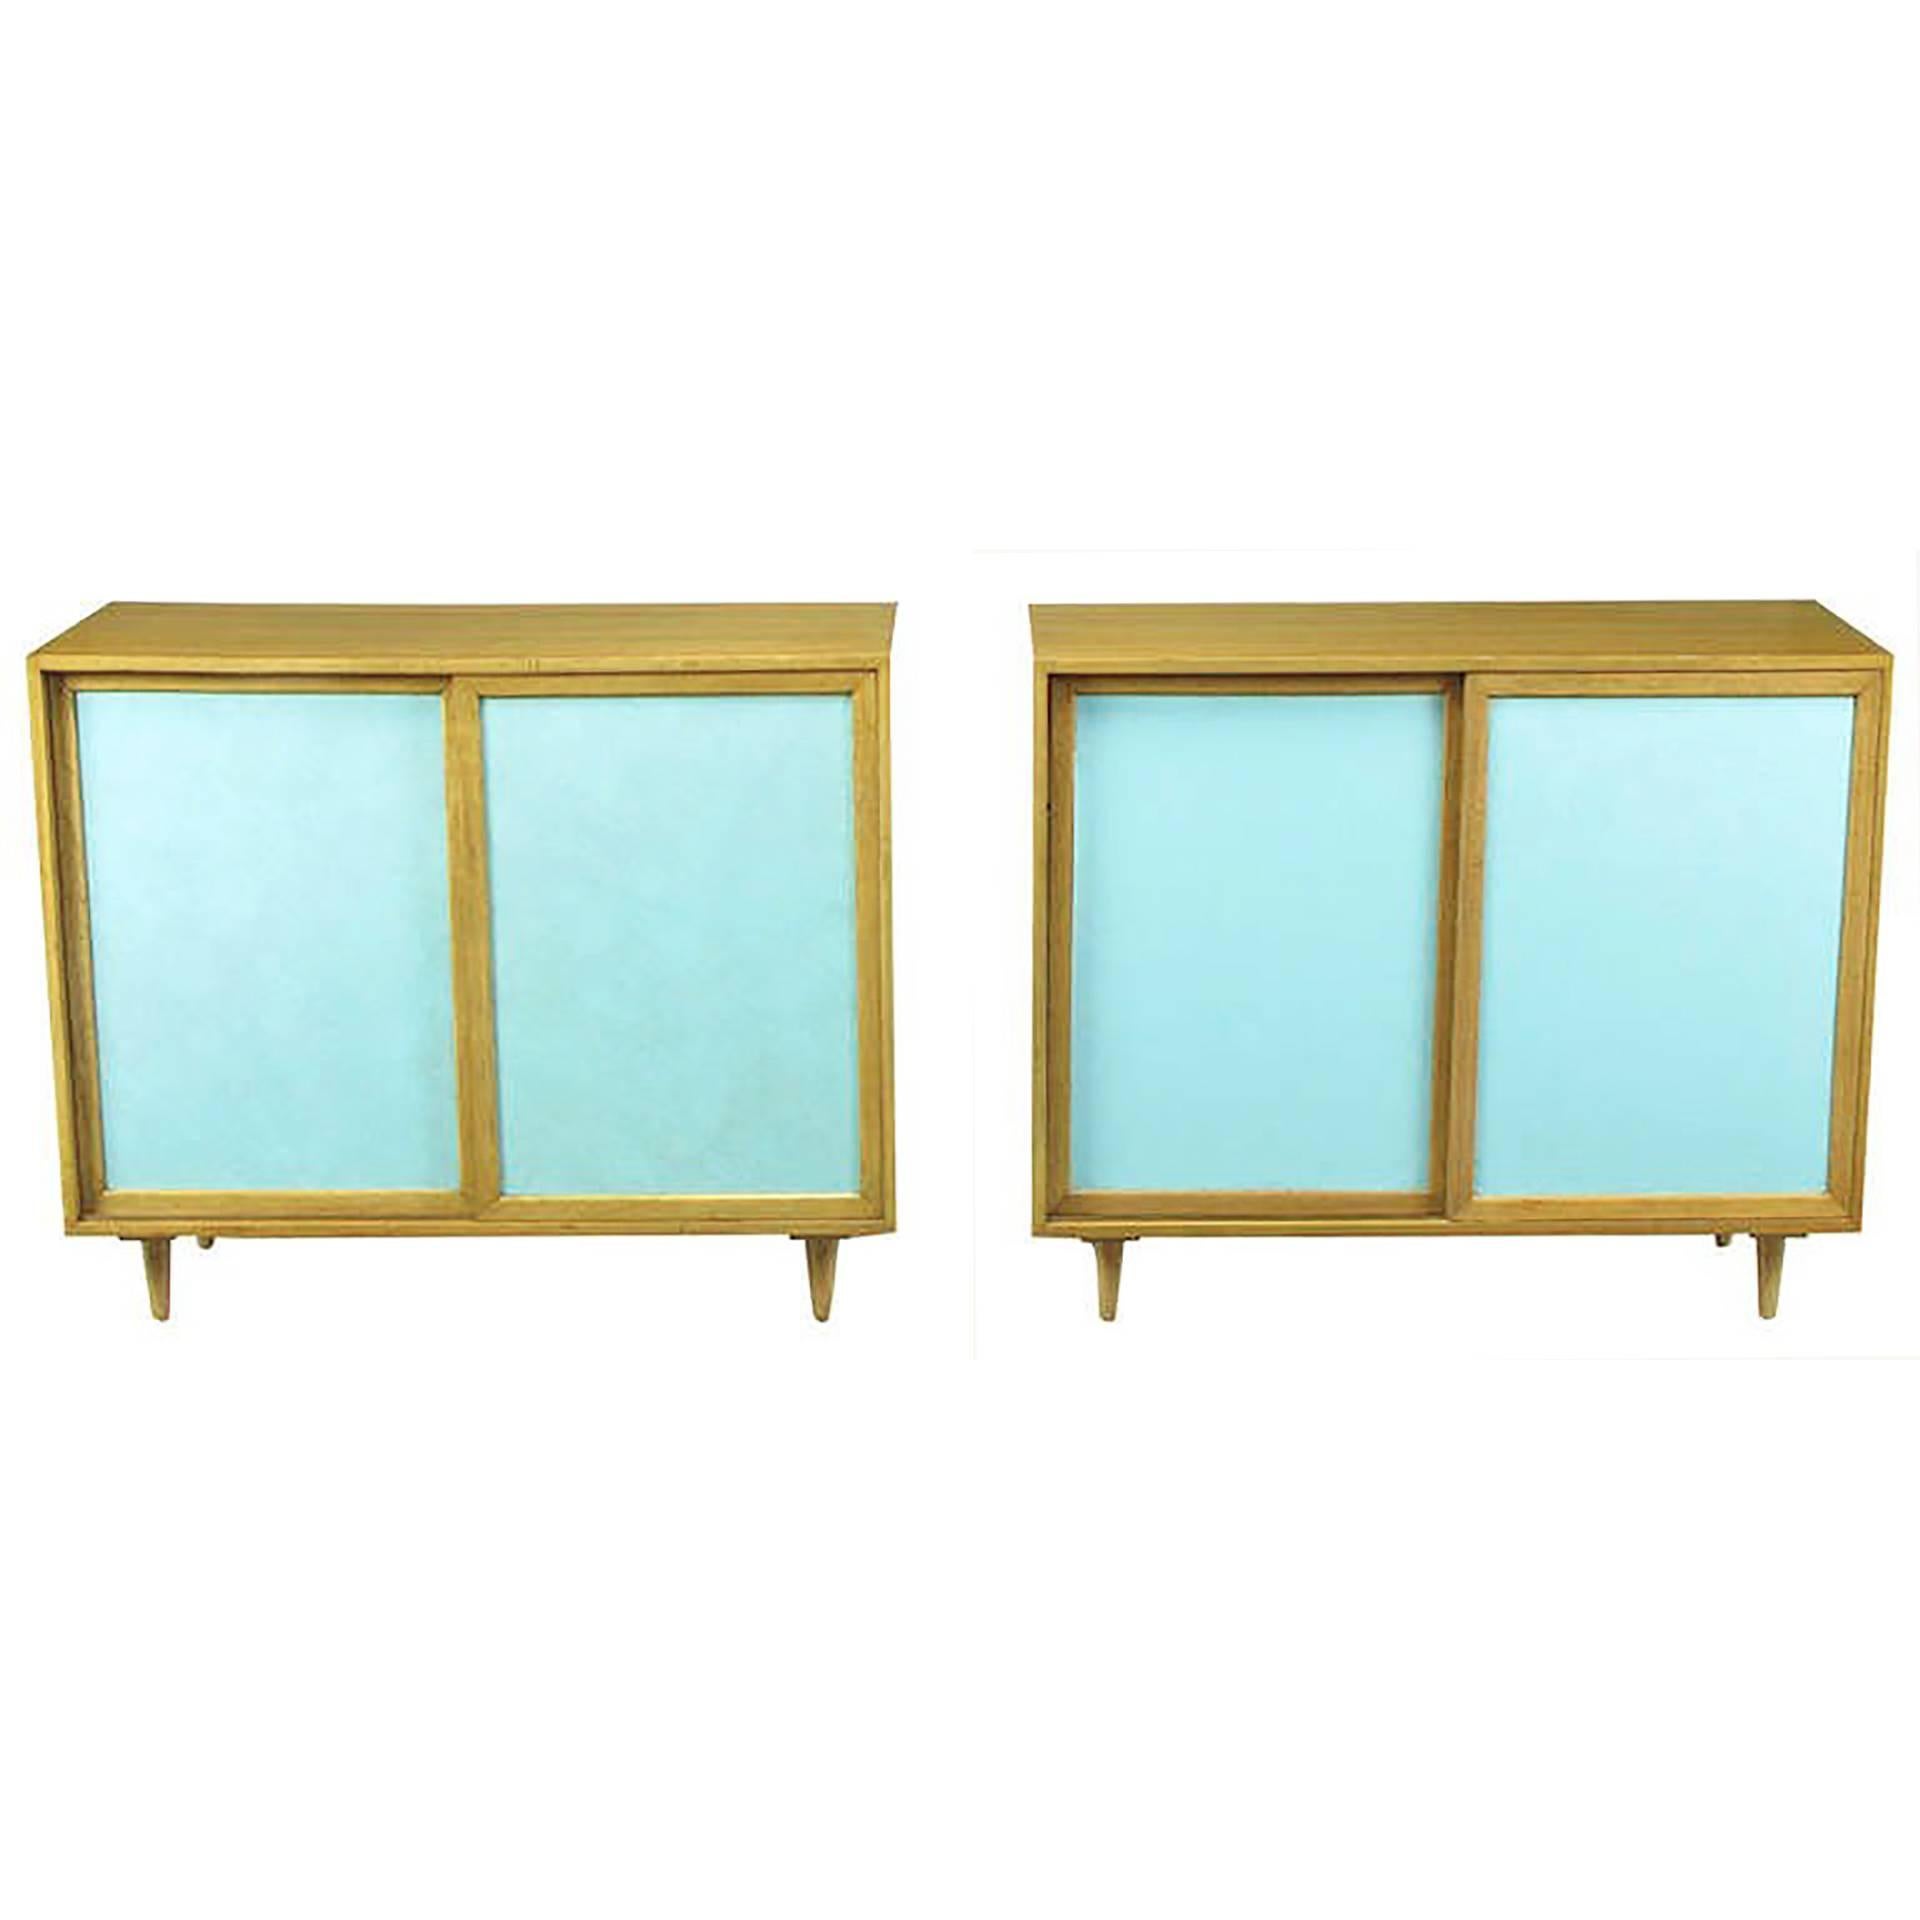 Pair of Harvey Probber Bleached Mahogany and Tiffany Blue Leather Front Cabinets